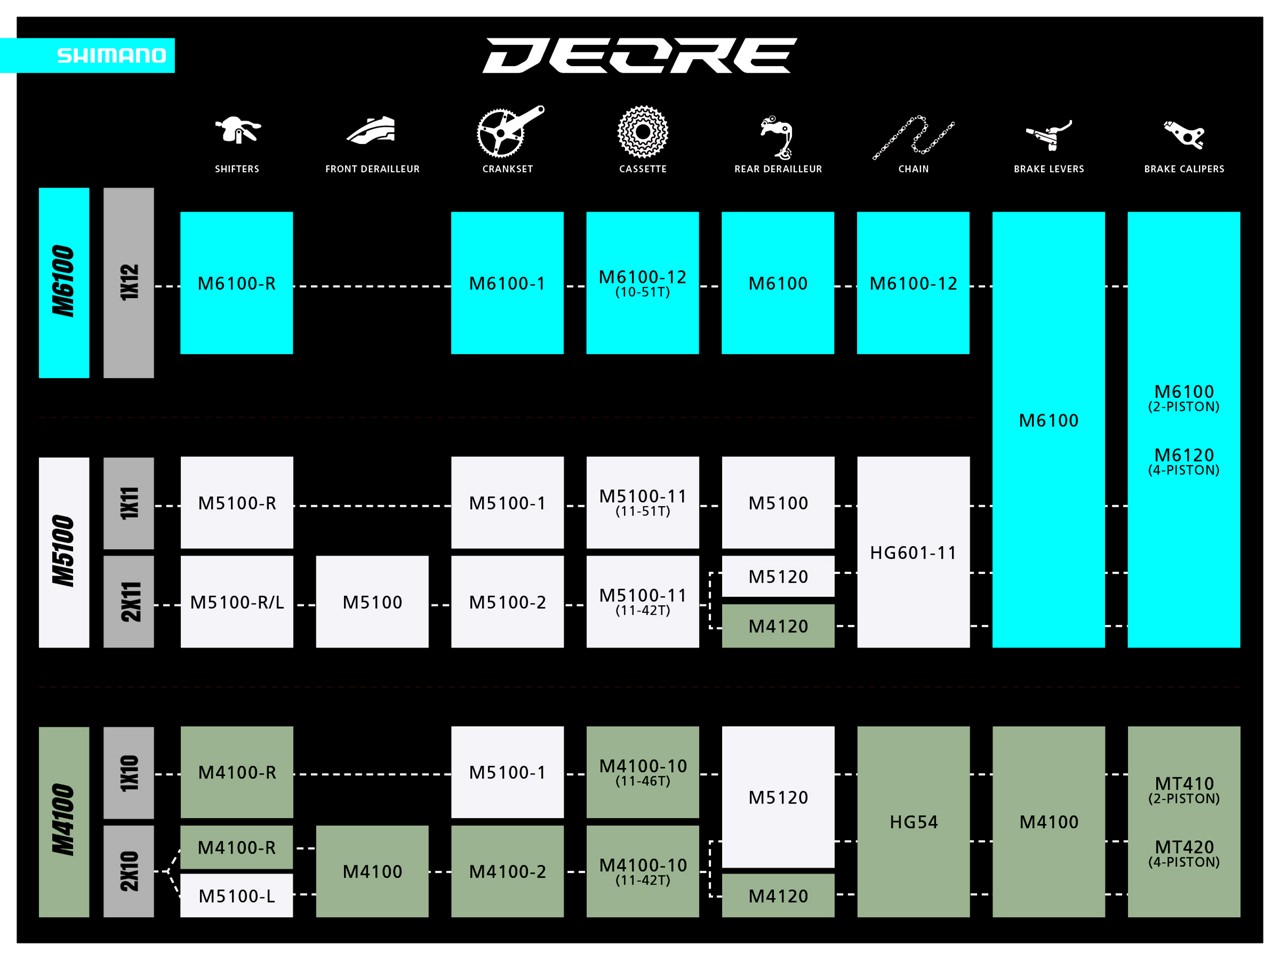 DEORE_M6100_Line-up